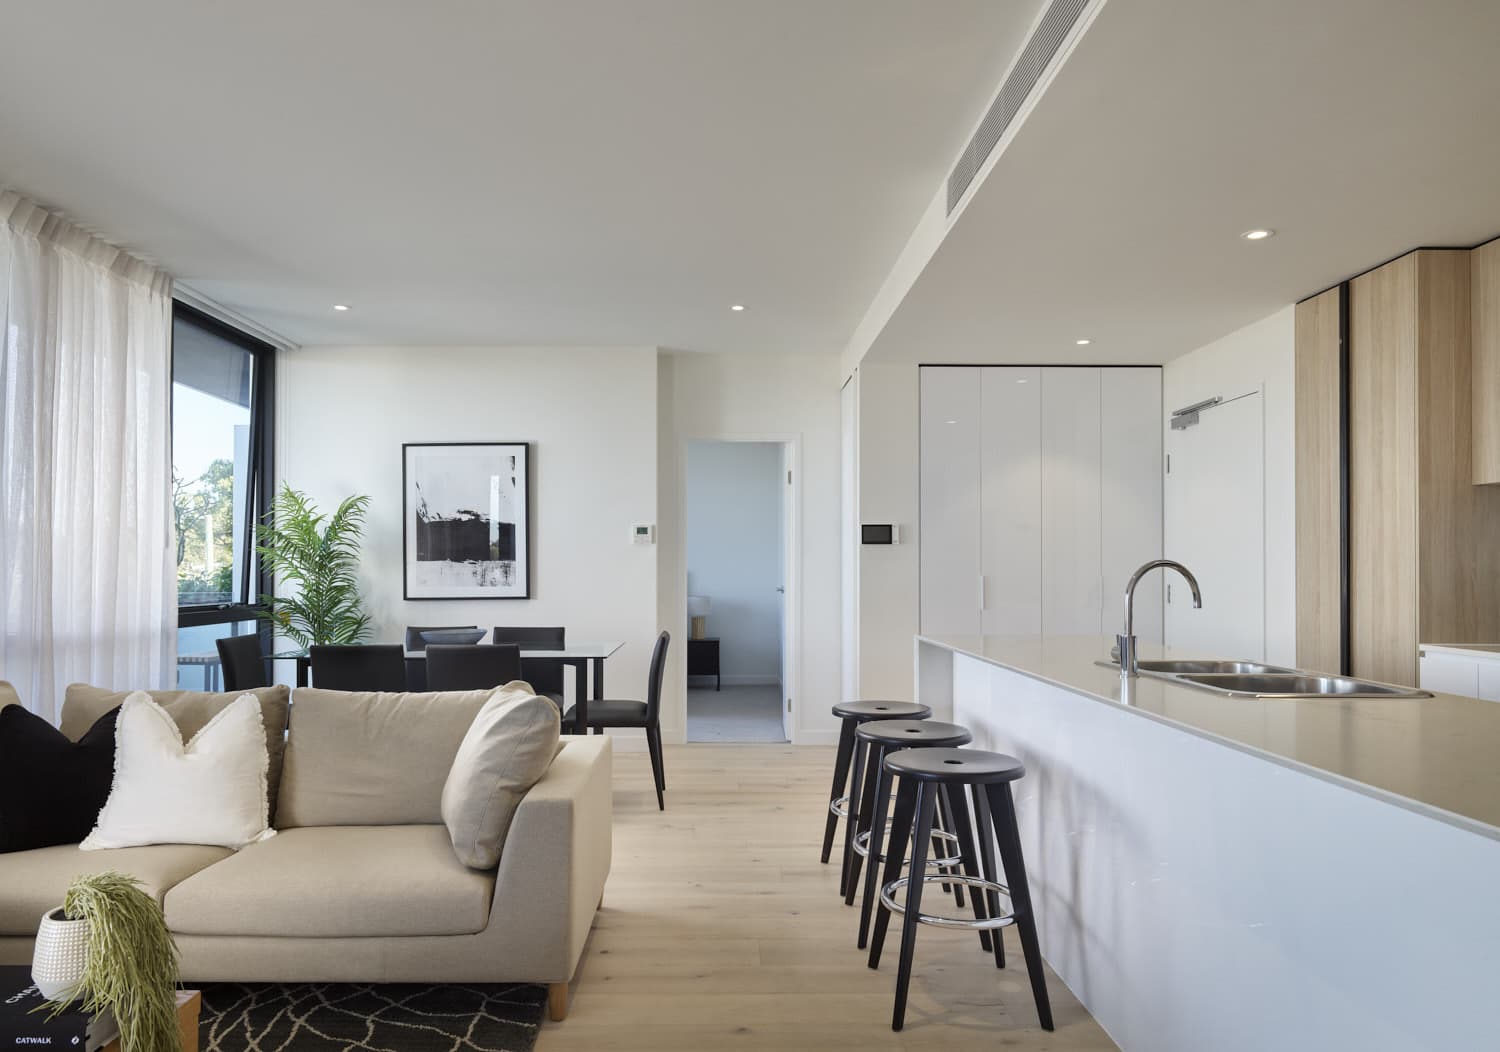 SPARKES STREET APARTMENTS FOR TIMKINS